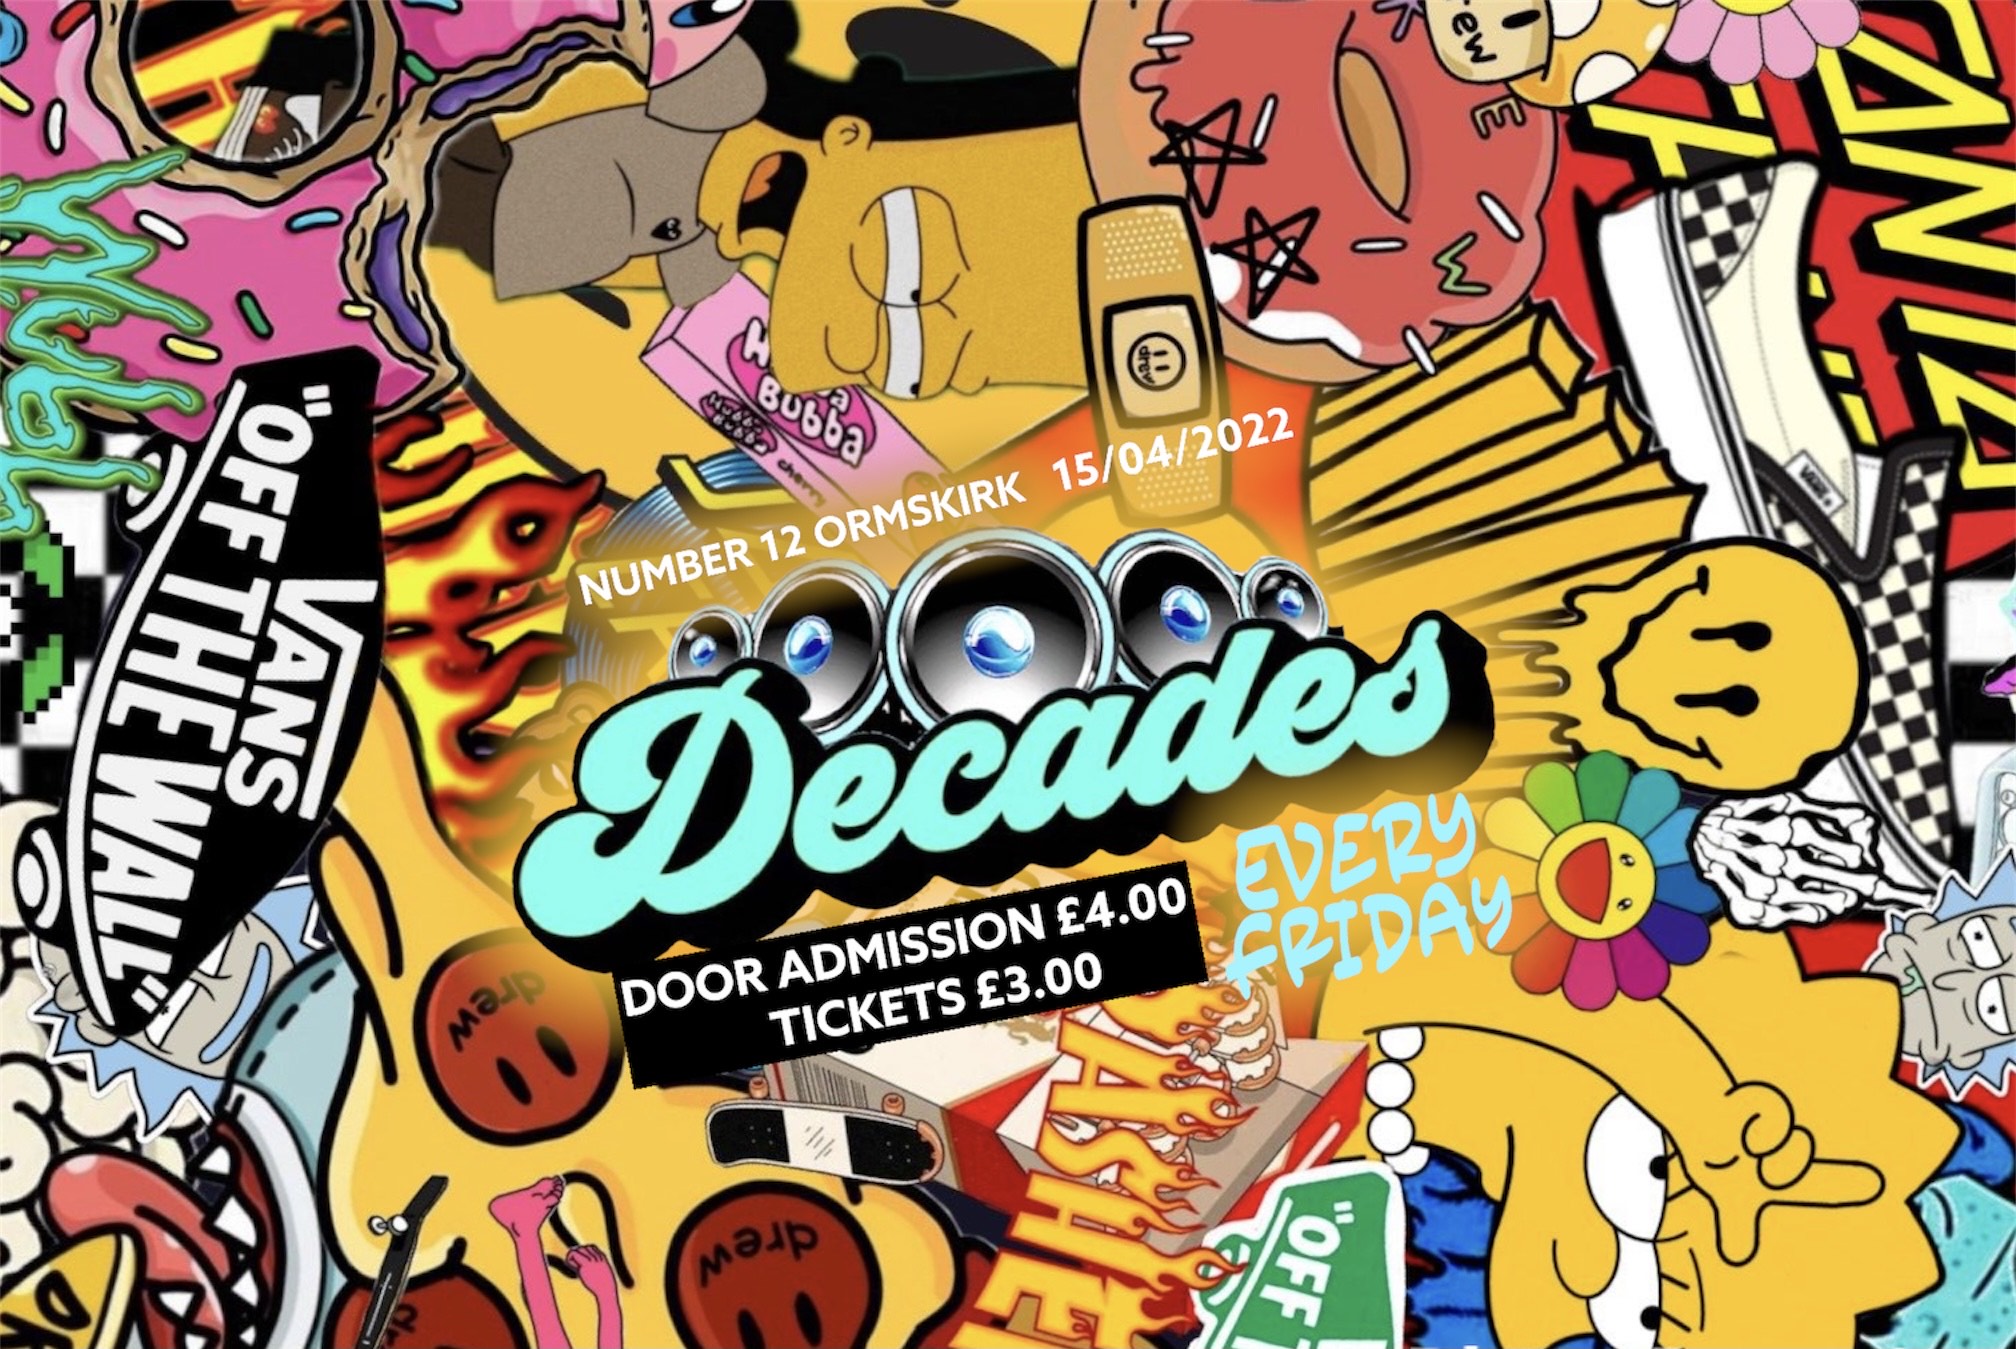 Decades - Good Friday Good Vibes Launch at Number Twelve Bar, Ormskirk on  15th Apr 2022 | Fatsoma